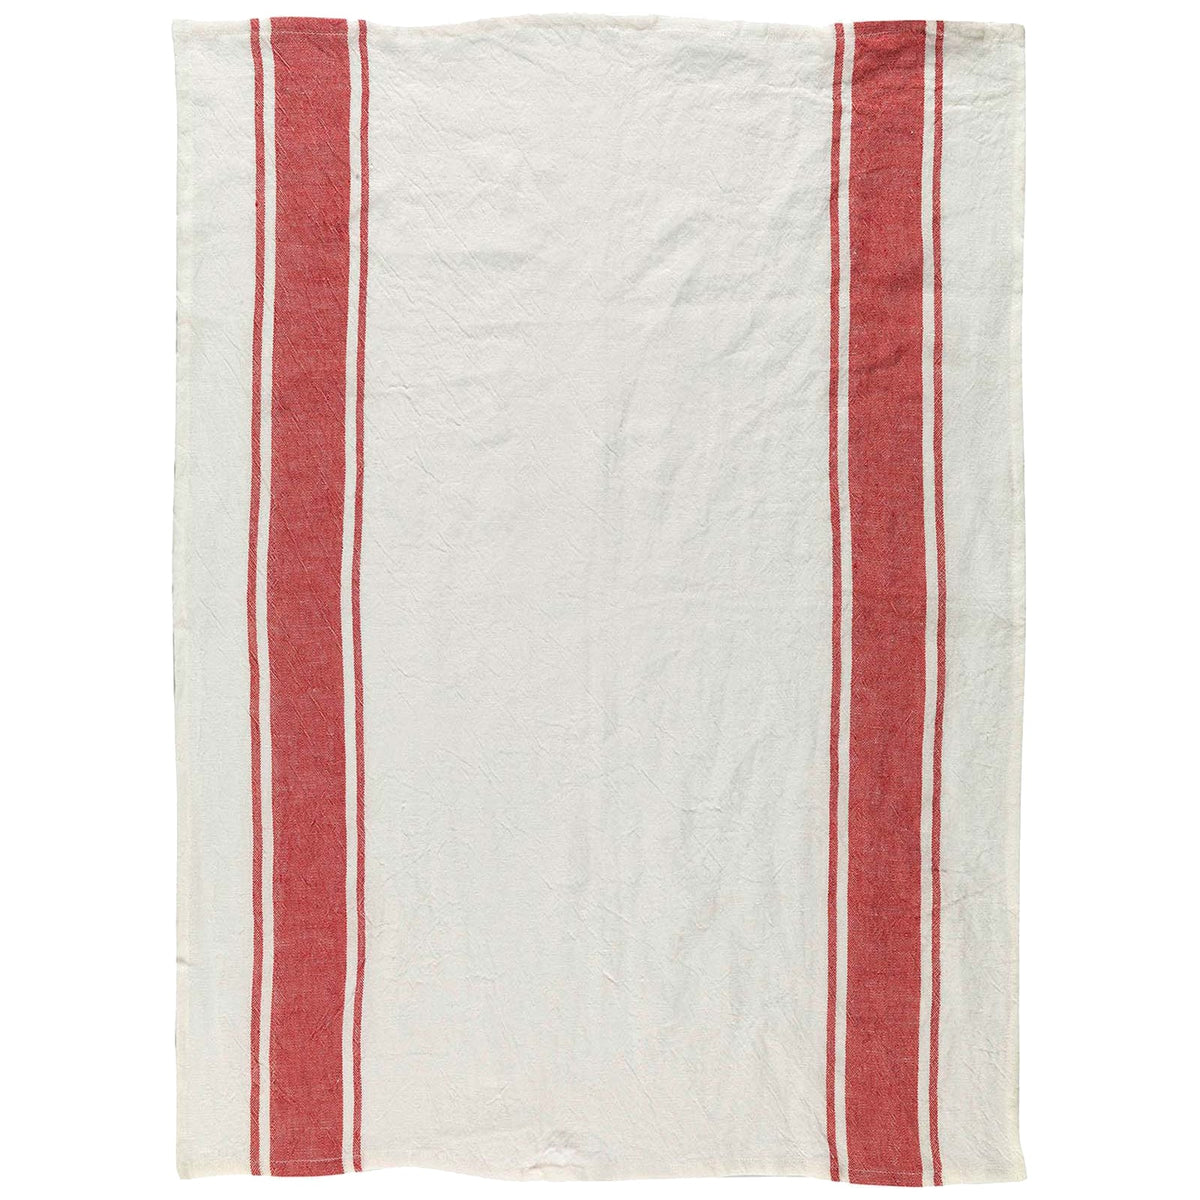 A Trattoria Rosso Linen Kitchen Towels Set/2 by TTT, a red and white striped kitchen towel on a white background.